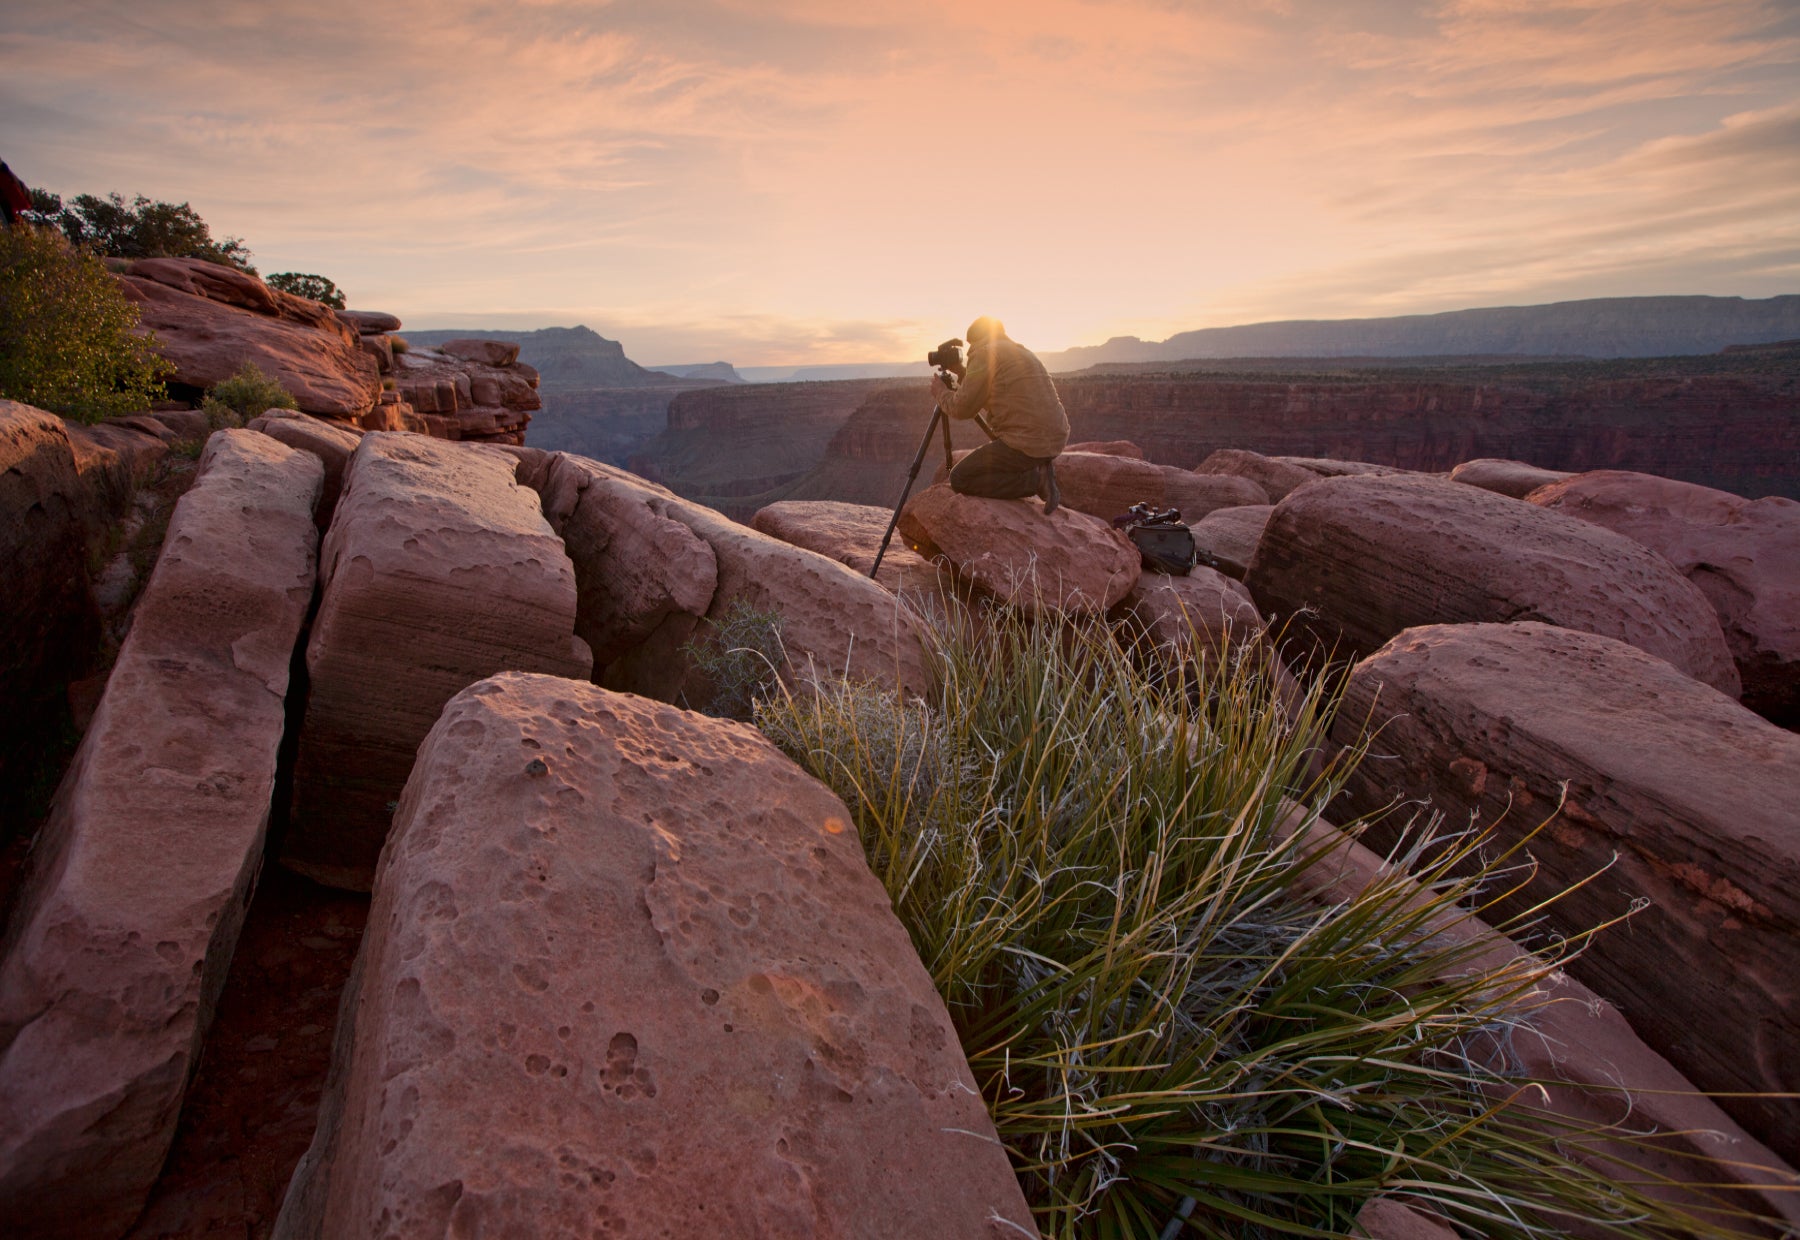 Portrait of Peter Lik kneeling down a rocky wall of Toroweap Overlook at The Grand Canyon National Park in Arizona at sunrise.